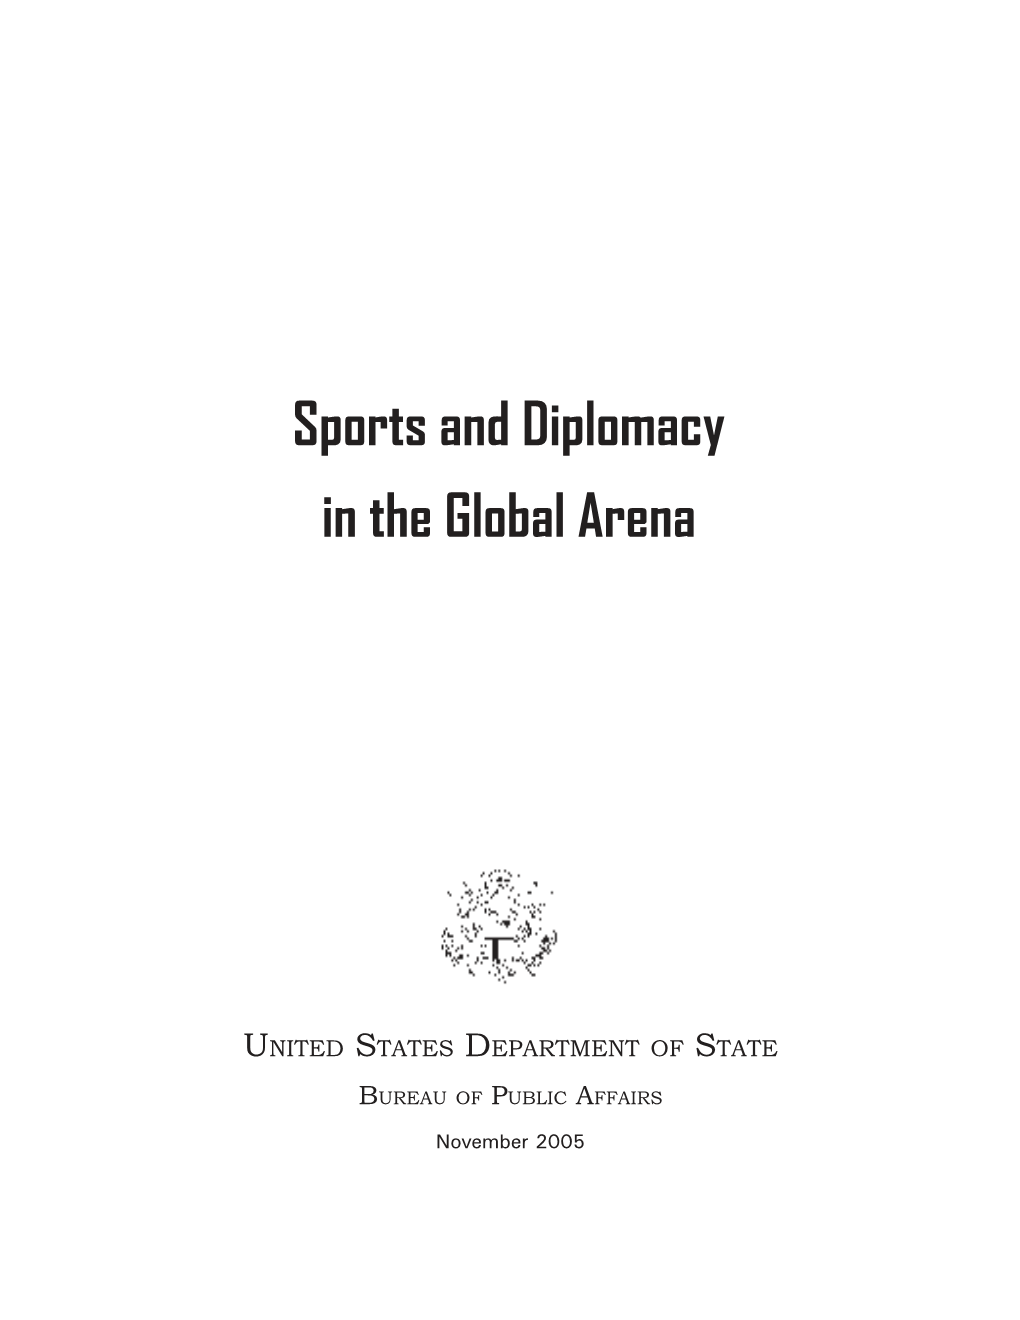 Sports and Diplomacy in the Global Arena